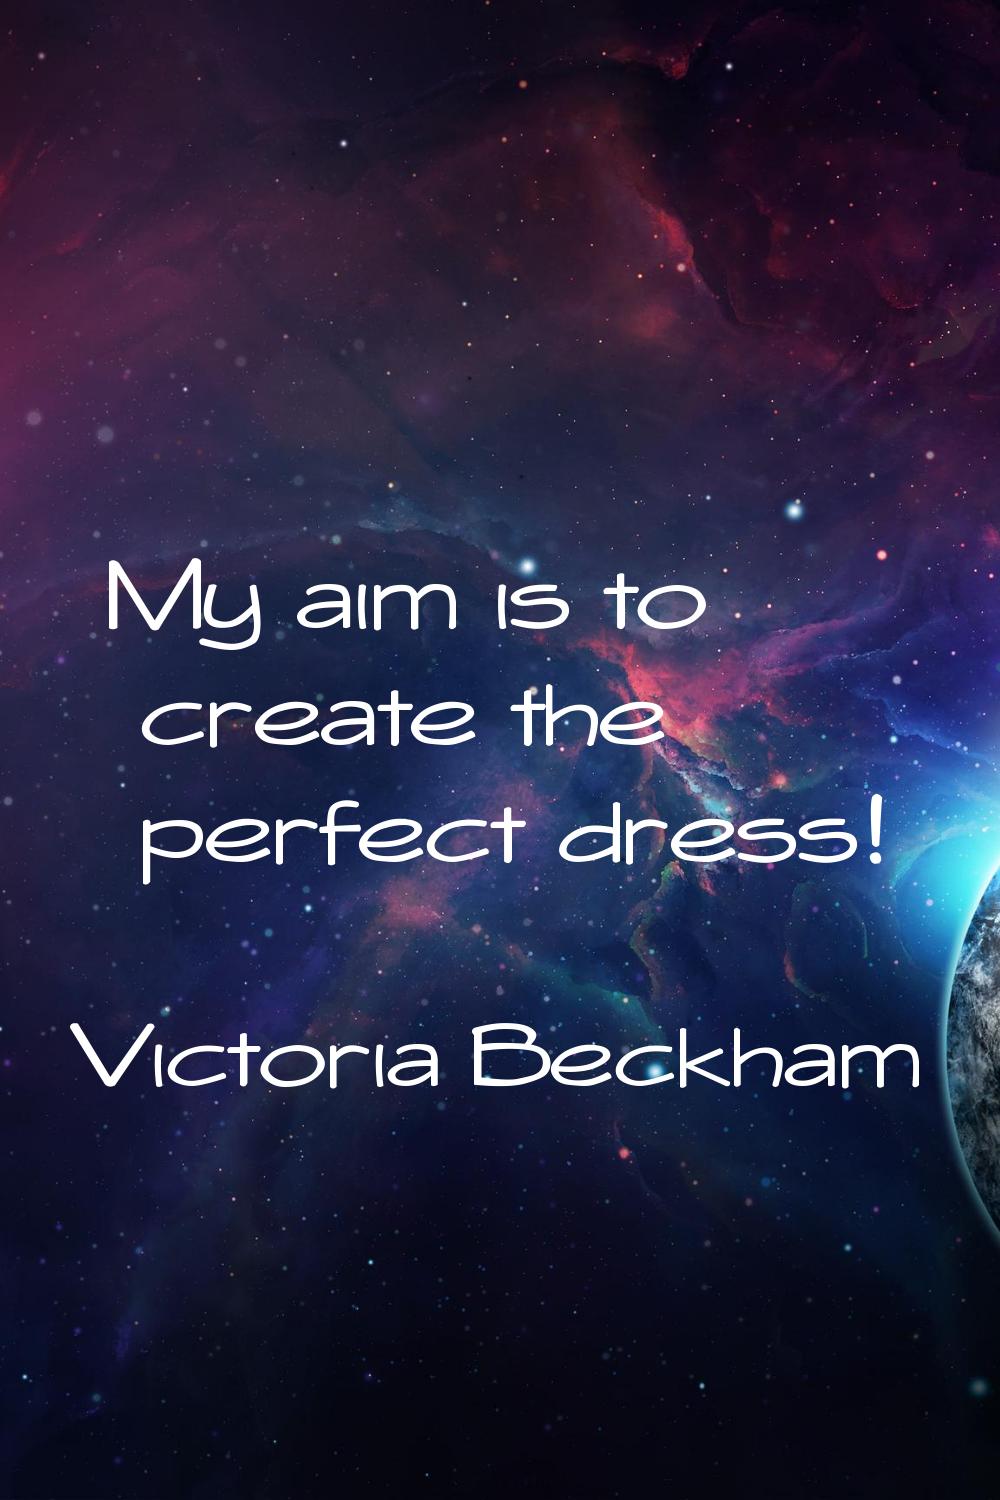 My aim is to create the perfect dress!